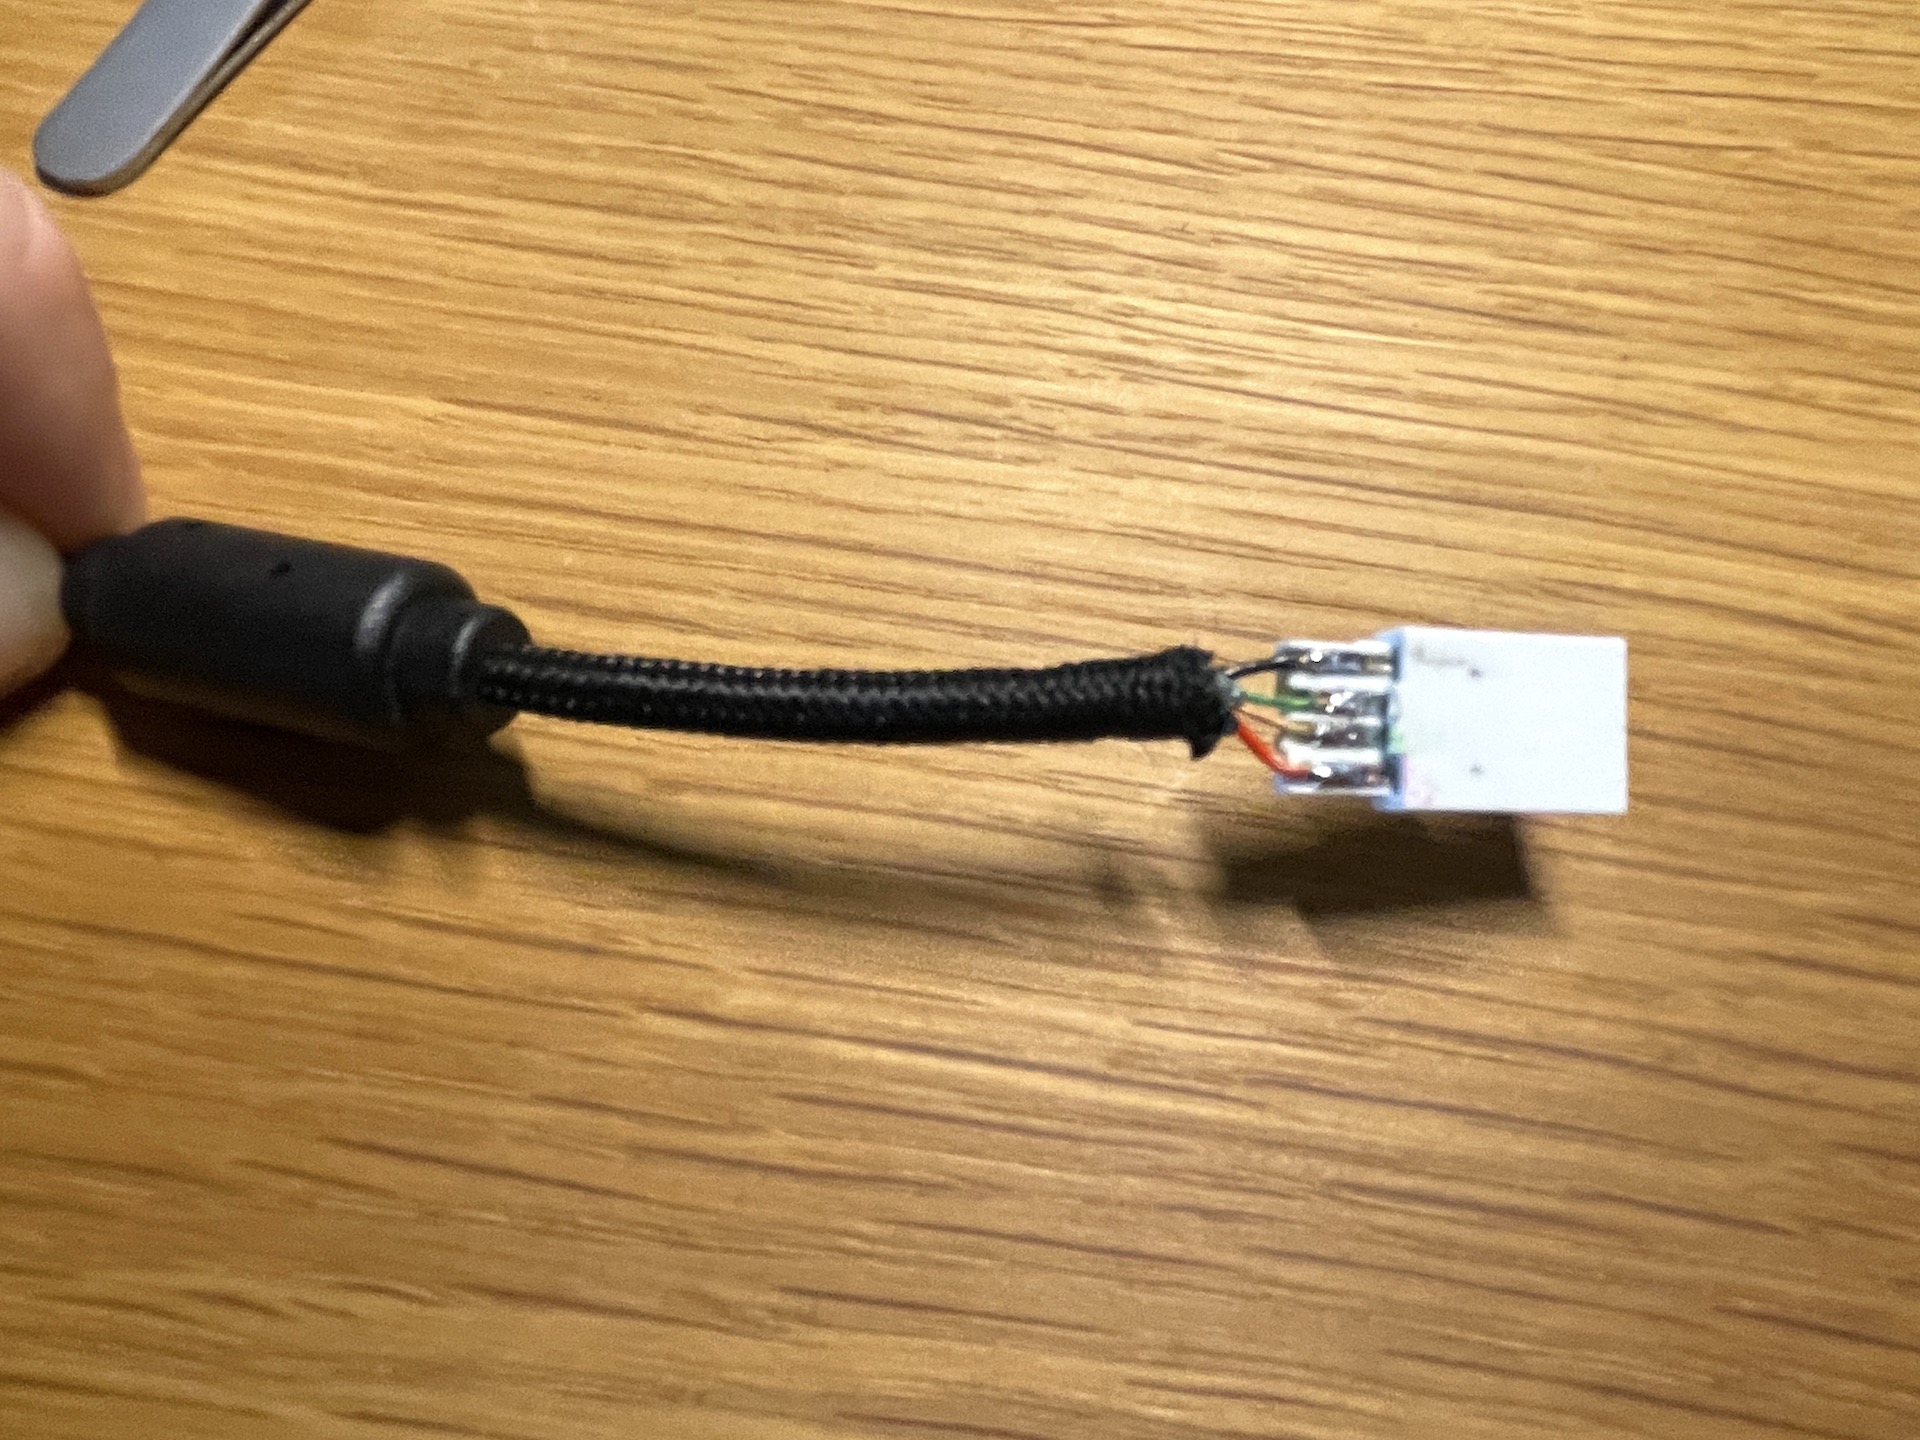 USB connector with wires soldered in the correct order